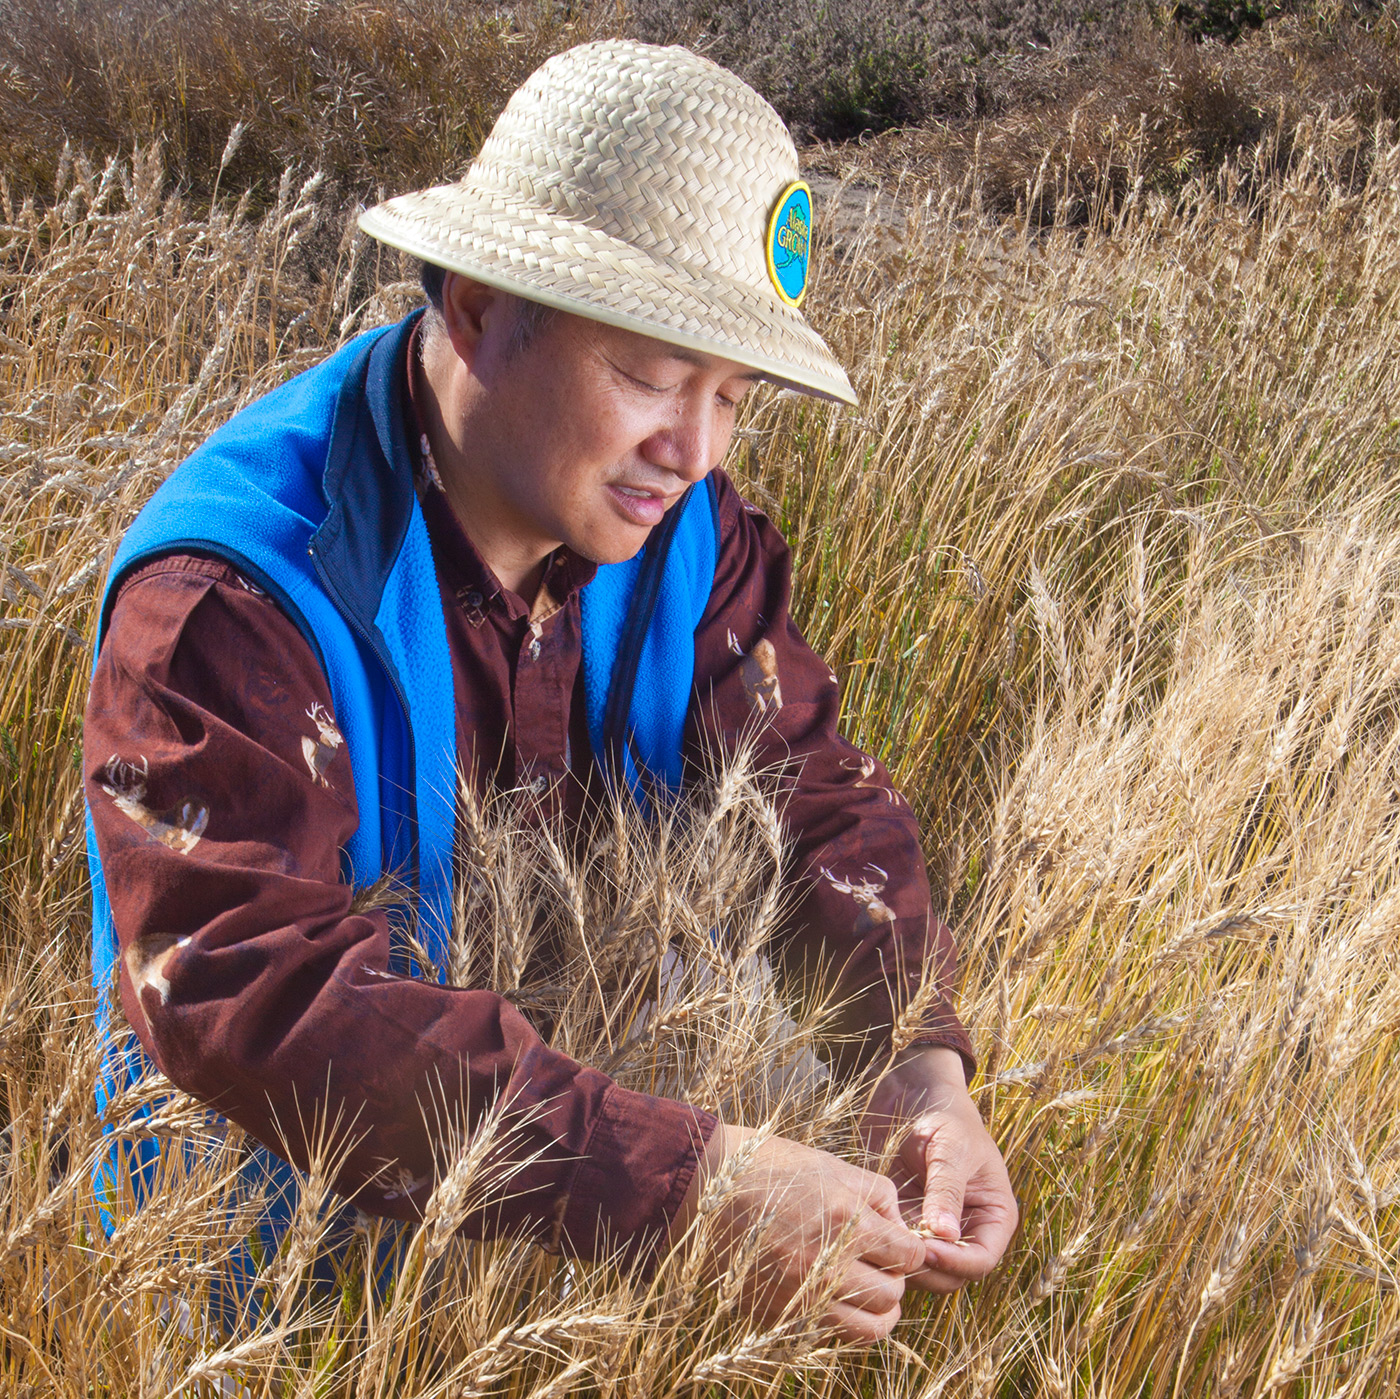 Mingchu Zhang, professor of agronomy and soil sciences with UAF’s School of Natural Resources and Extension, samples mature wheat in 2011. The wheat is being studied as a potential Alaska crop. UAF photo by Todd Paris.